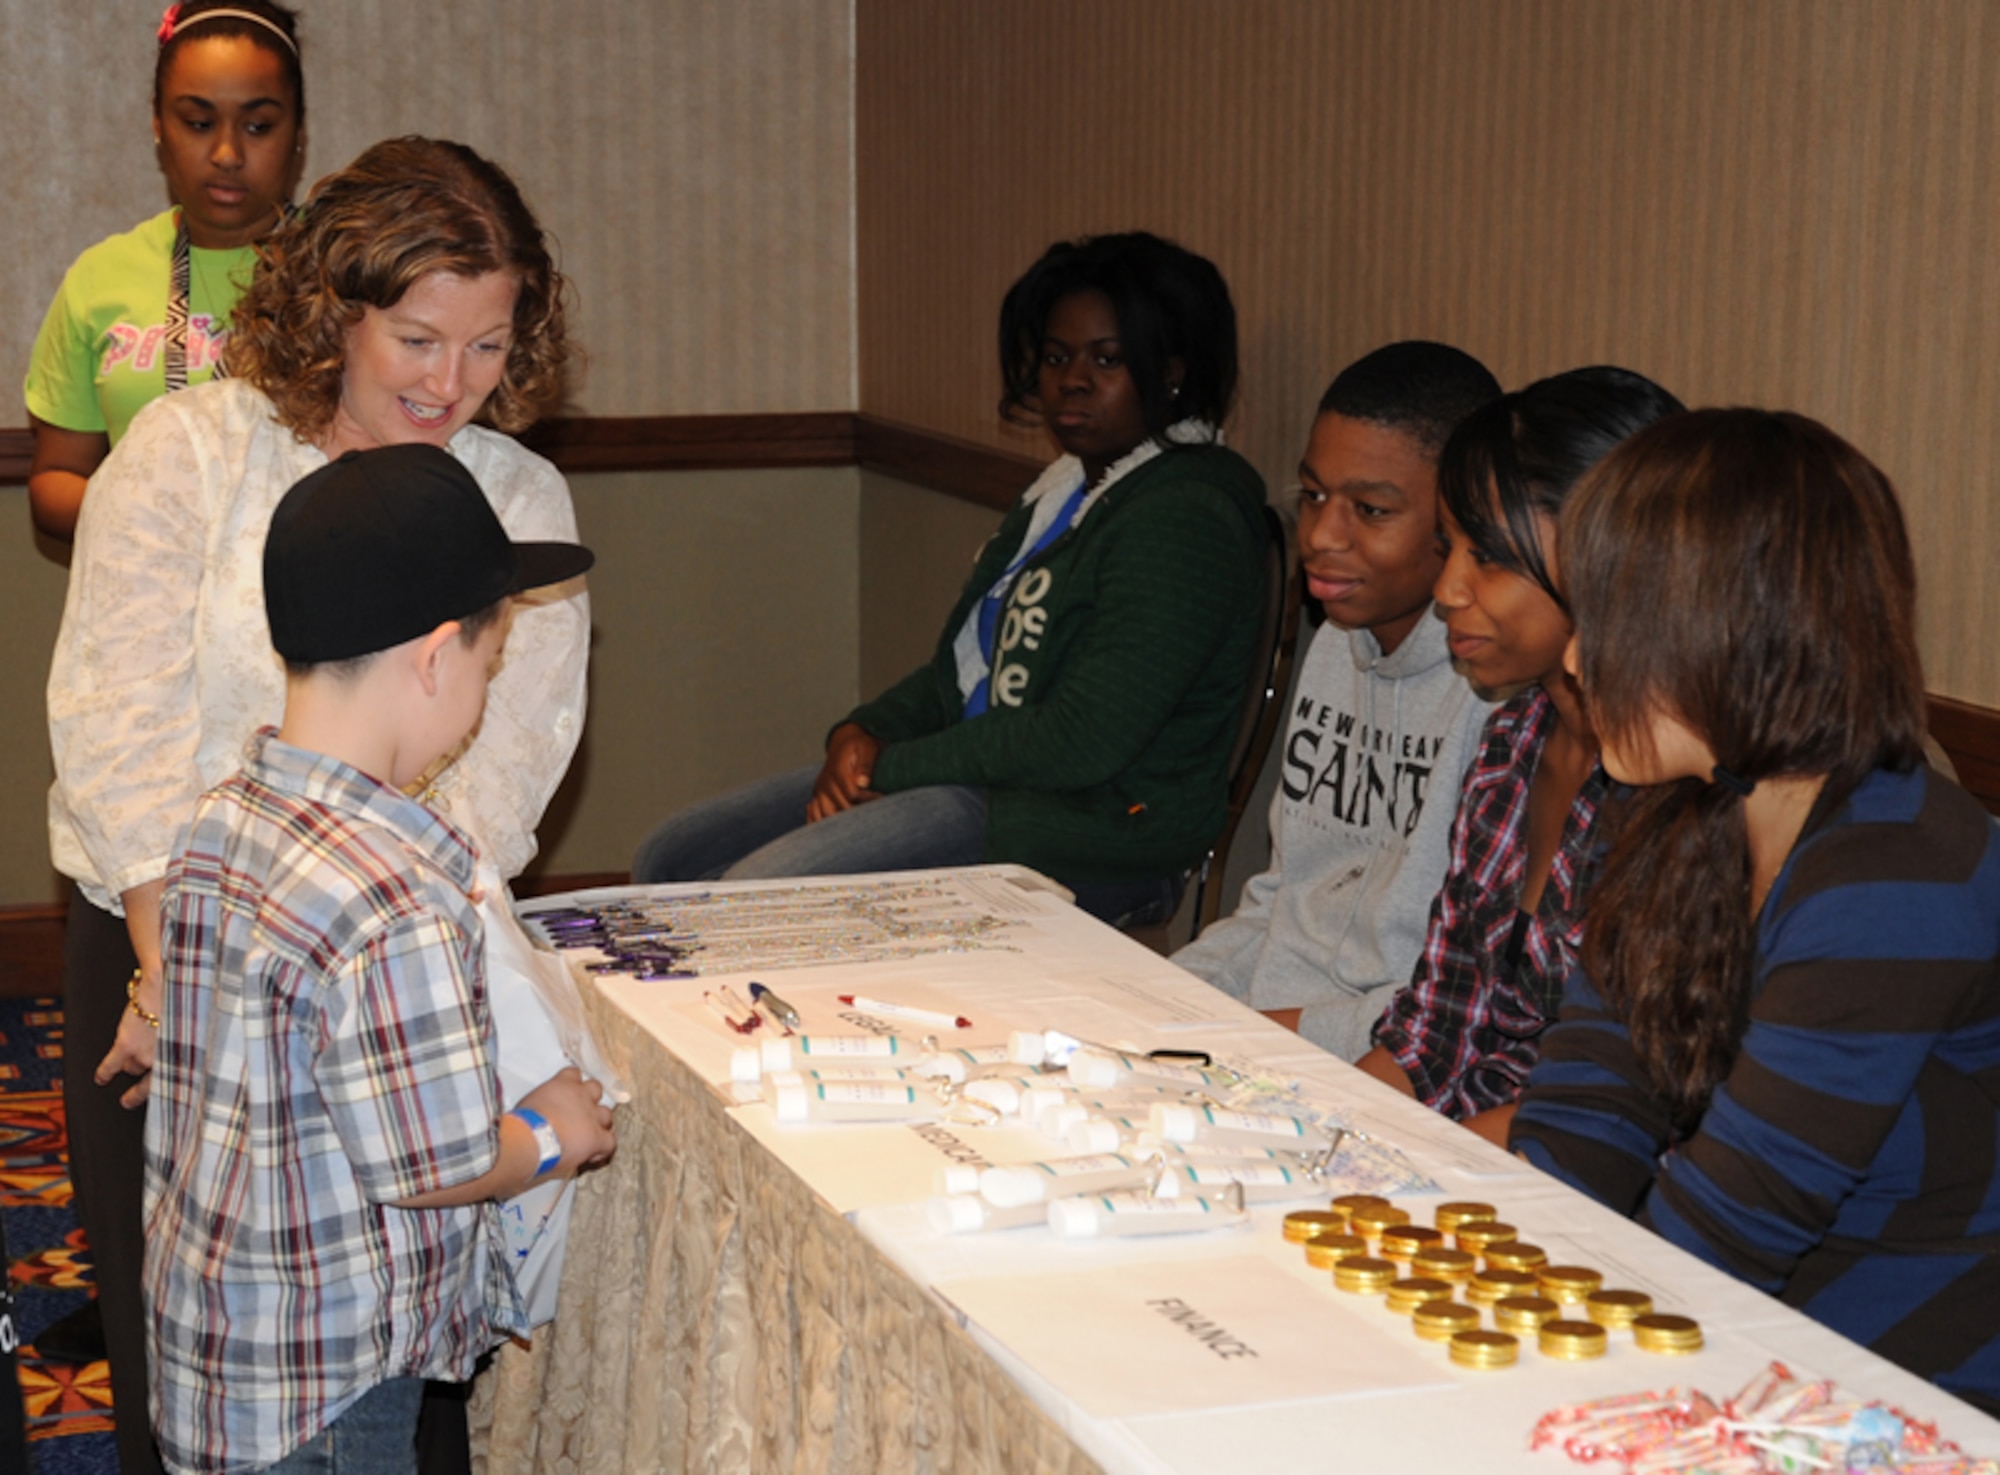 Capt. Lori Mann, 919th Special Operations Wing, Eglin Air Force Base, Fla. (left) explains the process to children going through a mock deployment line at the Hilton Memphis Hotel, Memphis, Tenn., Nov. 20, 2010 at the Yellow Ribbon Program. The children, who were dependents of service members attending YRP, were cared for during the conference free of charge. (U.S. Air Force photo by Senior Airman Anna-Marie Wyant)